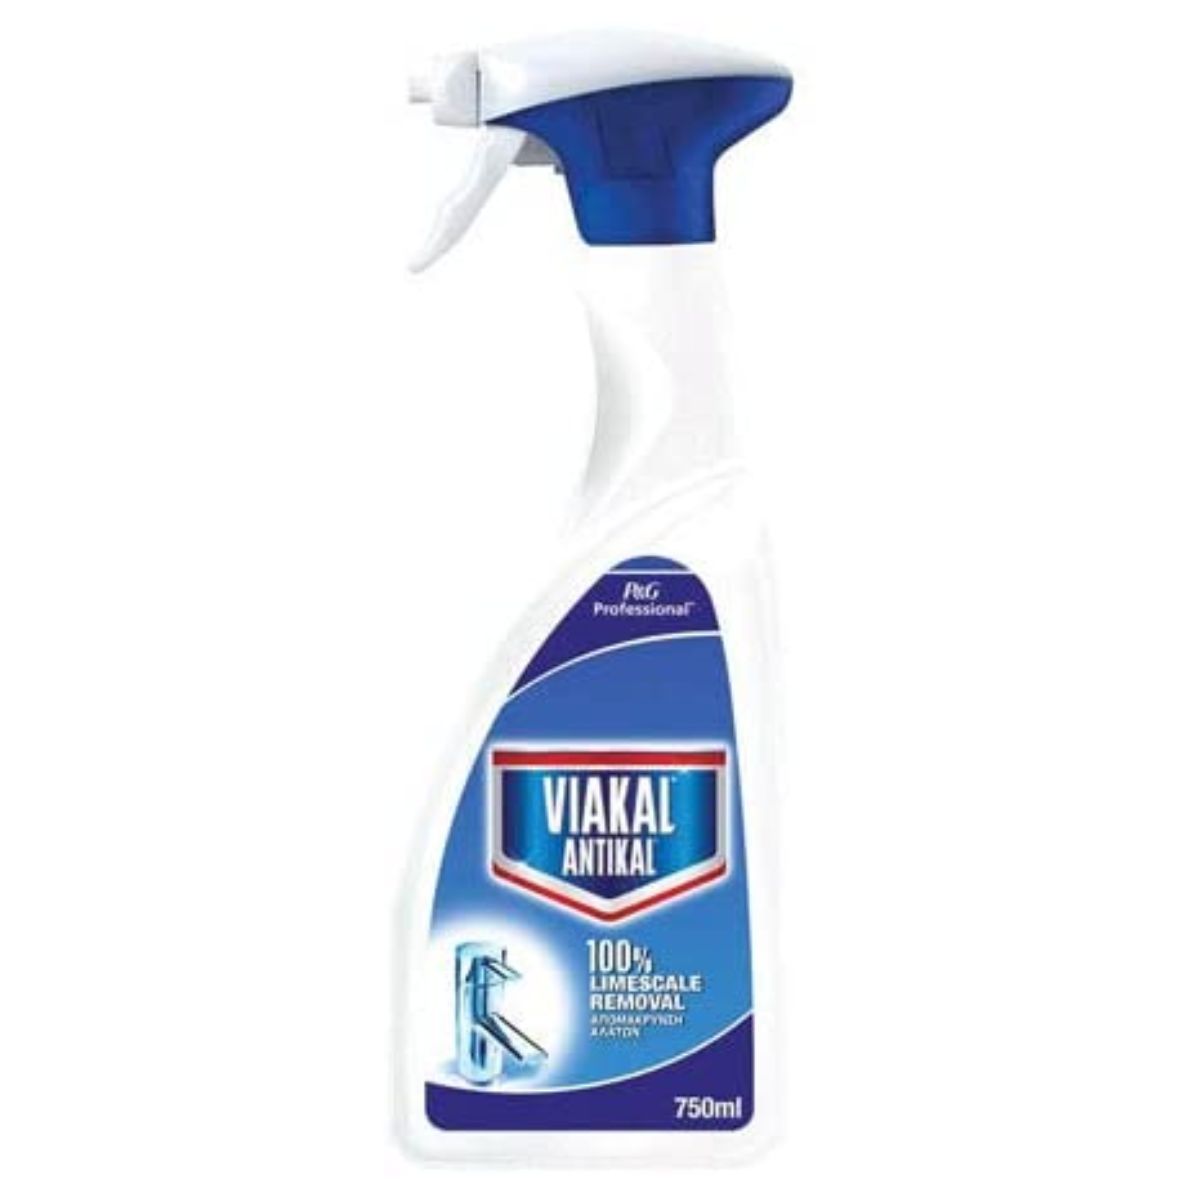 A Viakal - Remover Spray - 750ml bottle with a blue lid.